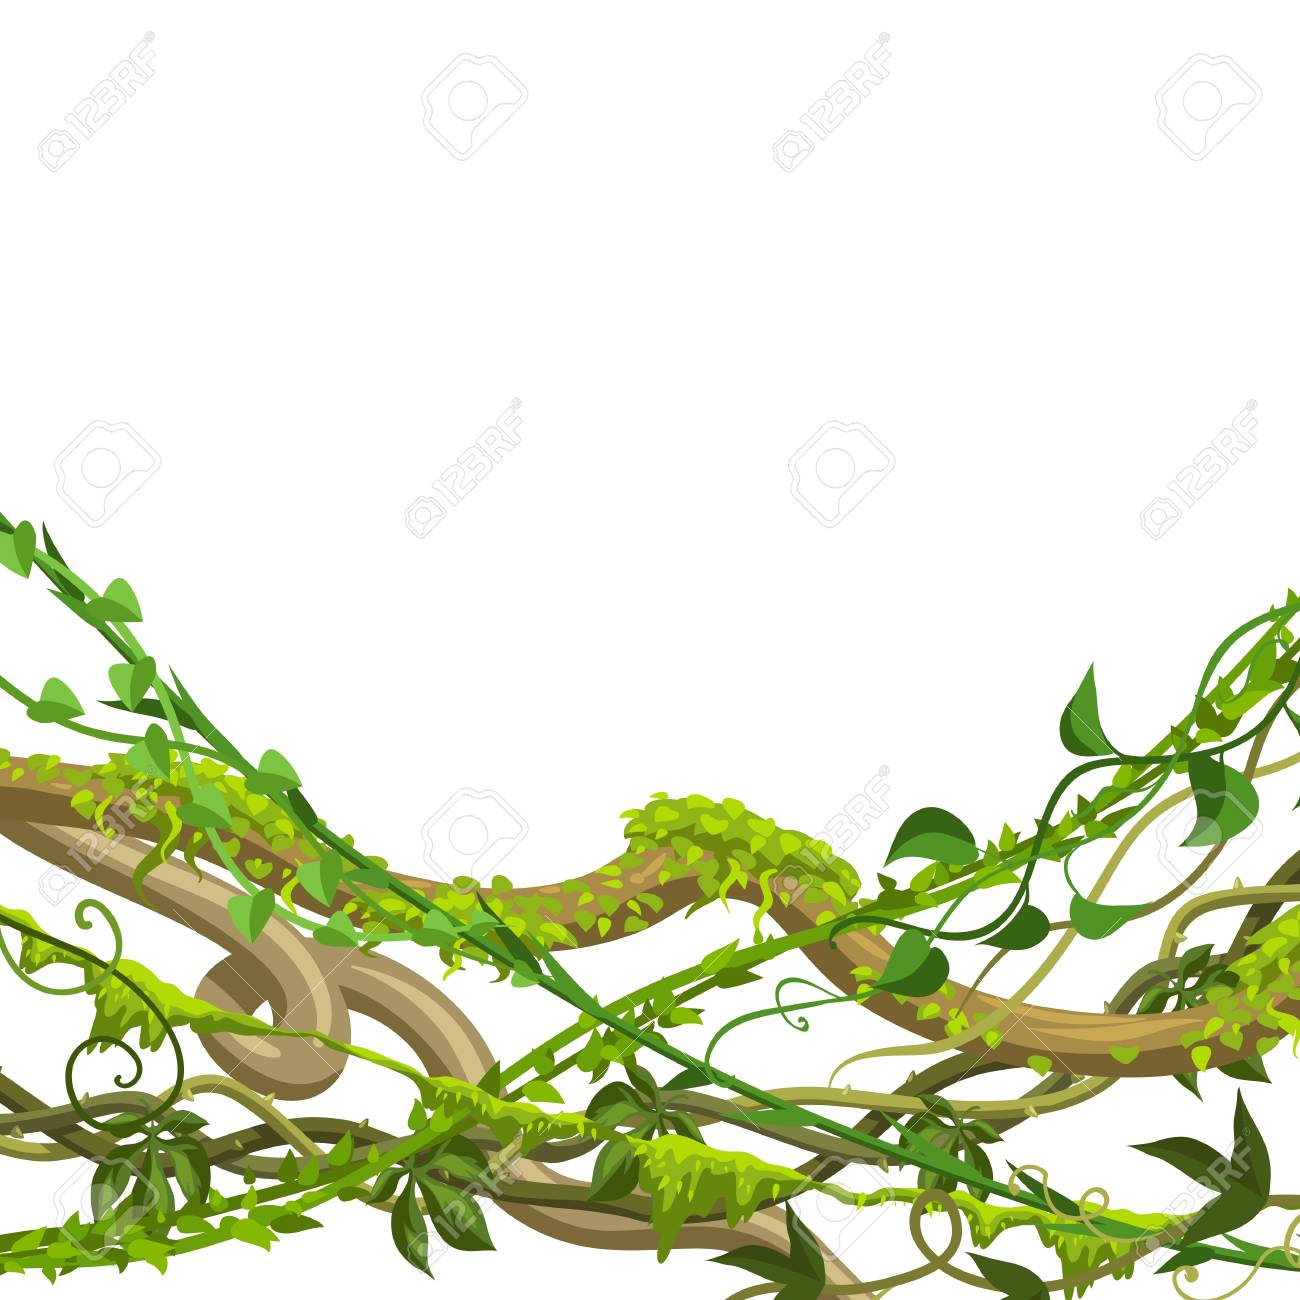 Twisted Wild Lianas Branches Background Jungle Vines Plants